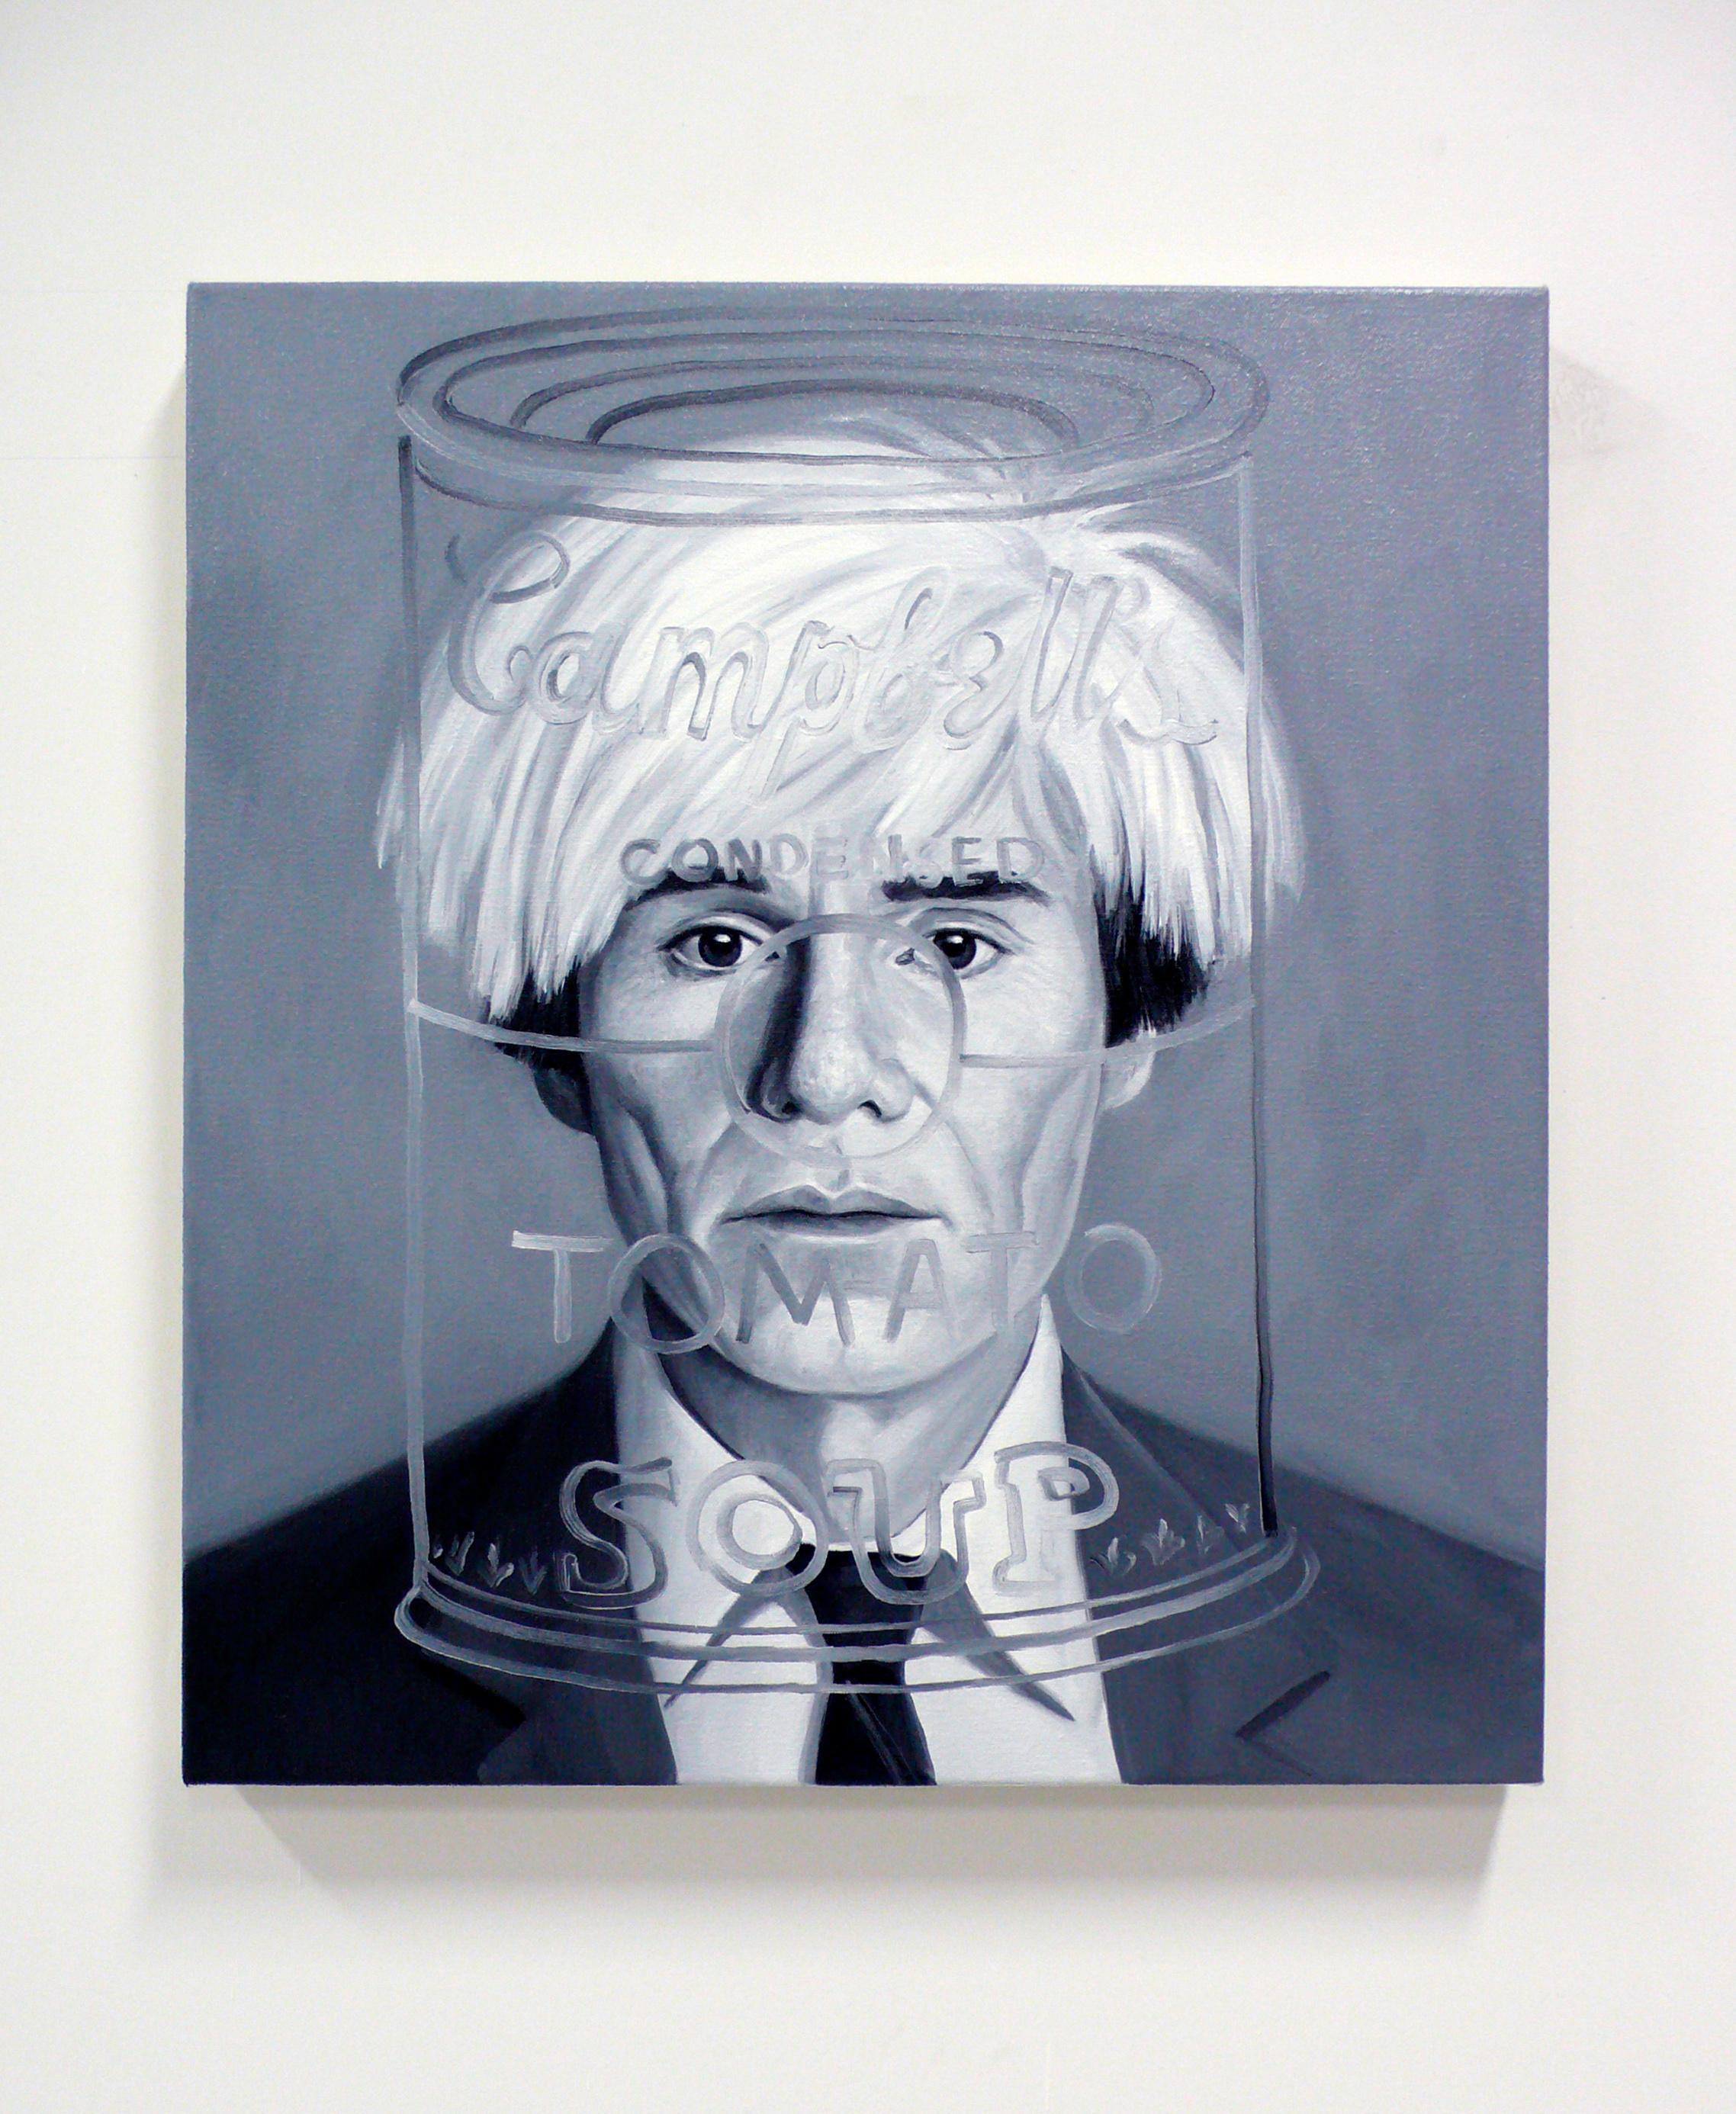 Meeting Andy Warhol,  B&W oil on canvas, B& W portrait, grisaille painting - Gray Portrait Painting by ANDRE VON MORISSE